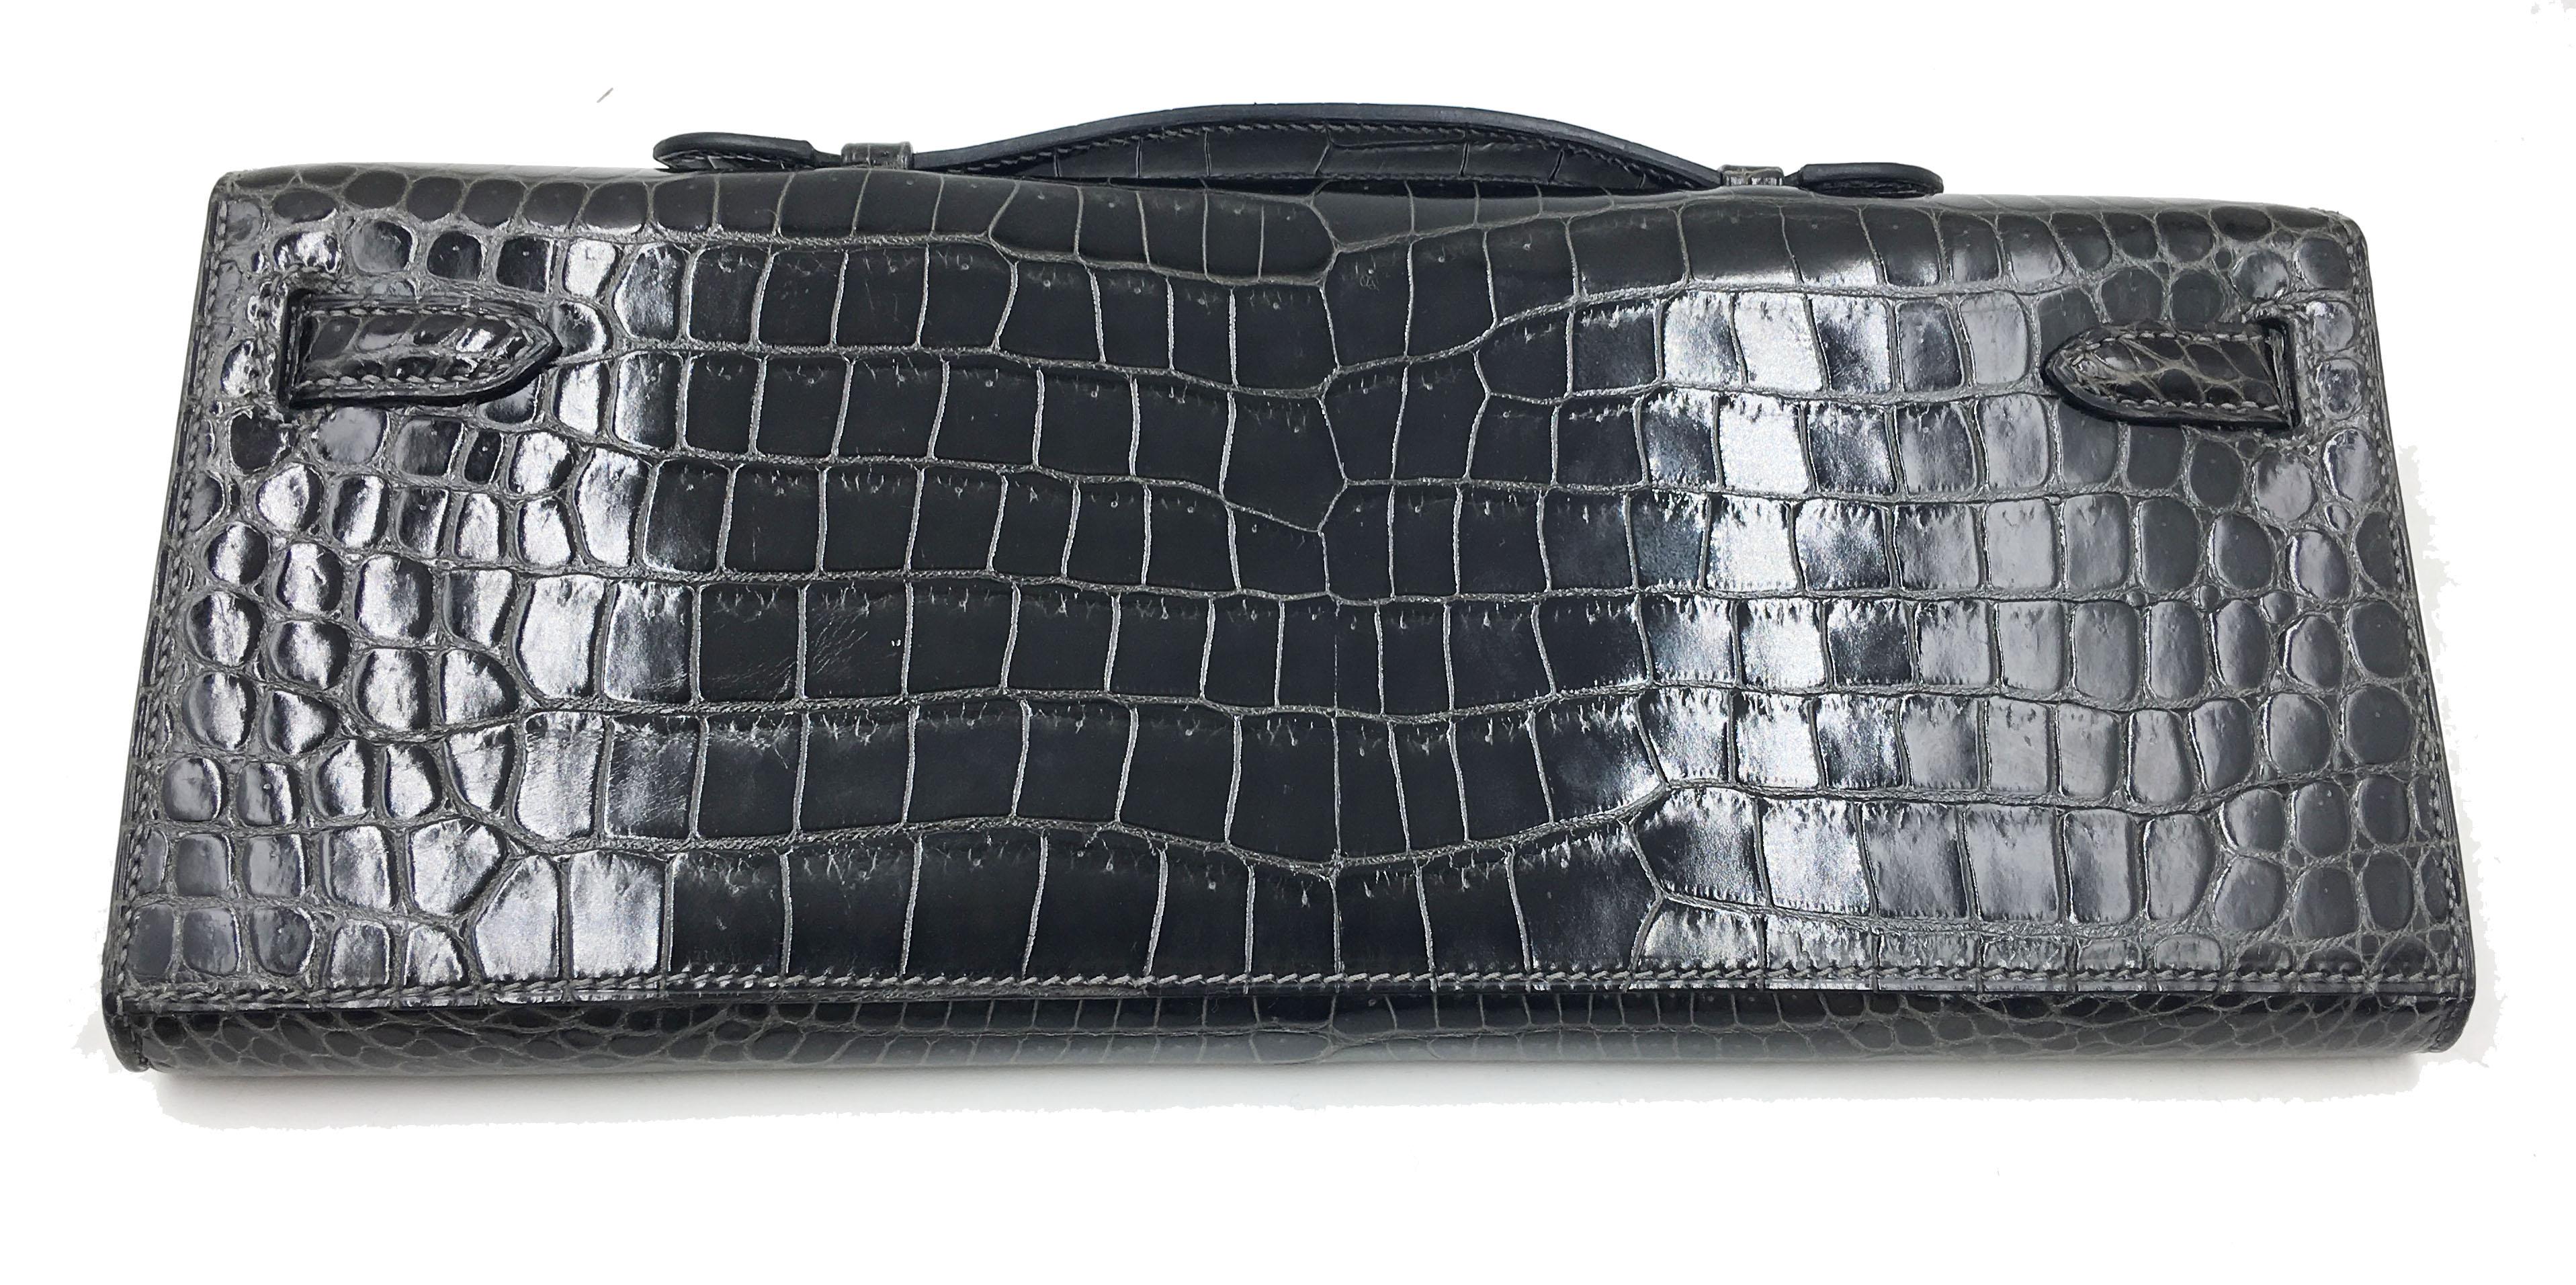 Hermes Kelly Shiny Black Porosus Crocodile Clutch with Diamonds.
Guaranteed authentic timeless very rare diamond Hermes Kelly Cut in rich jewel toned
Exquisite piece with Hermes set diamonds.

Collection M
Size: approximately 12.25